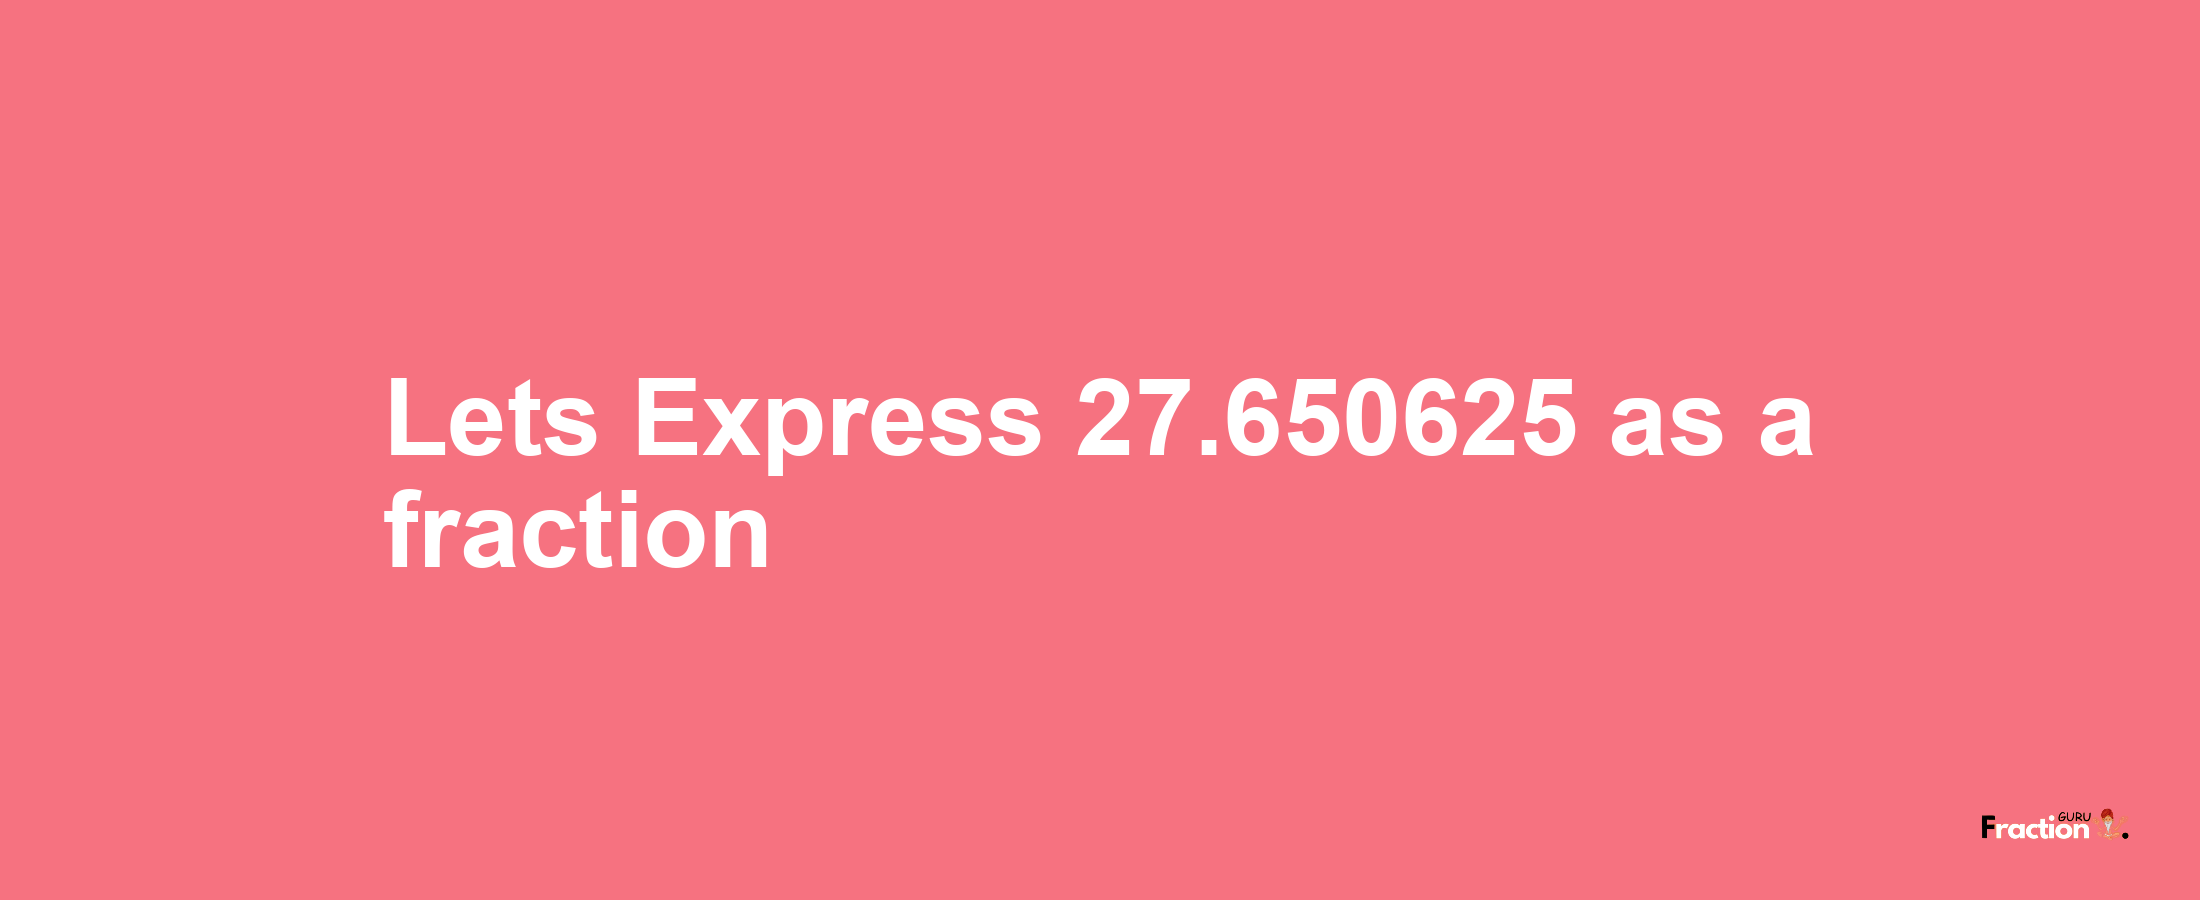 Lets Express 27.650625 as afraction